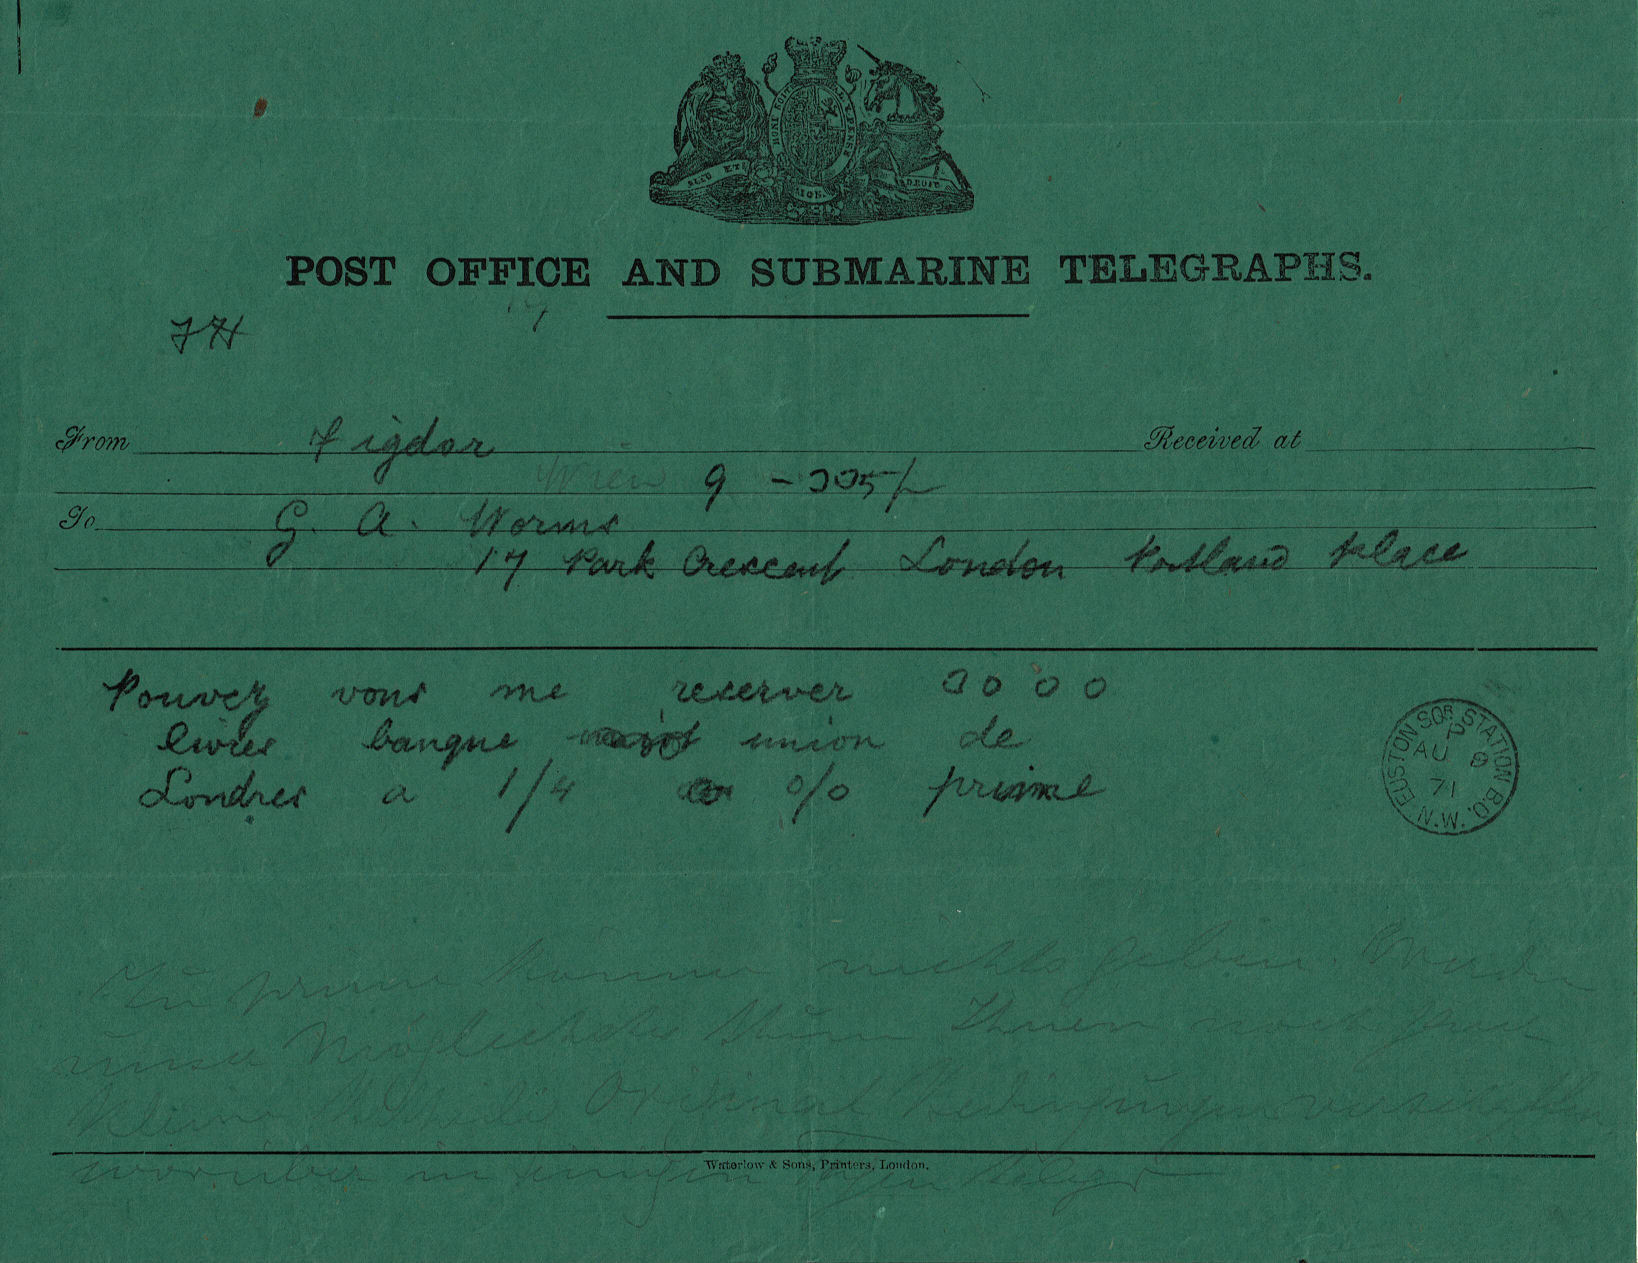 Post Office and Submarine Telegraphs form - 1871